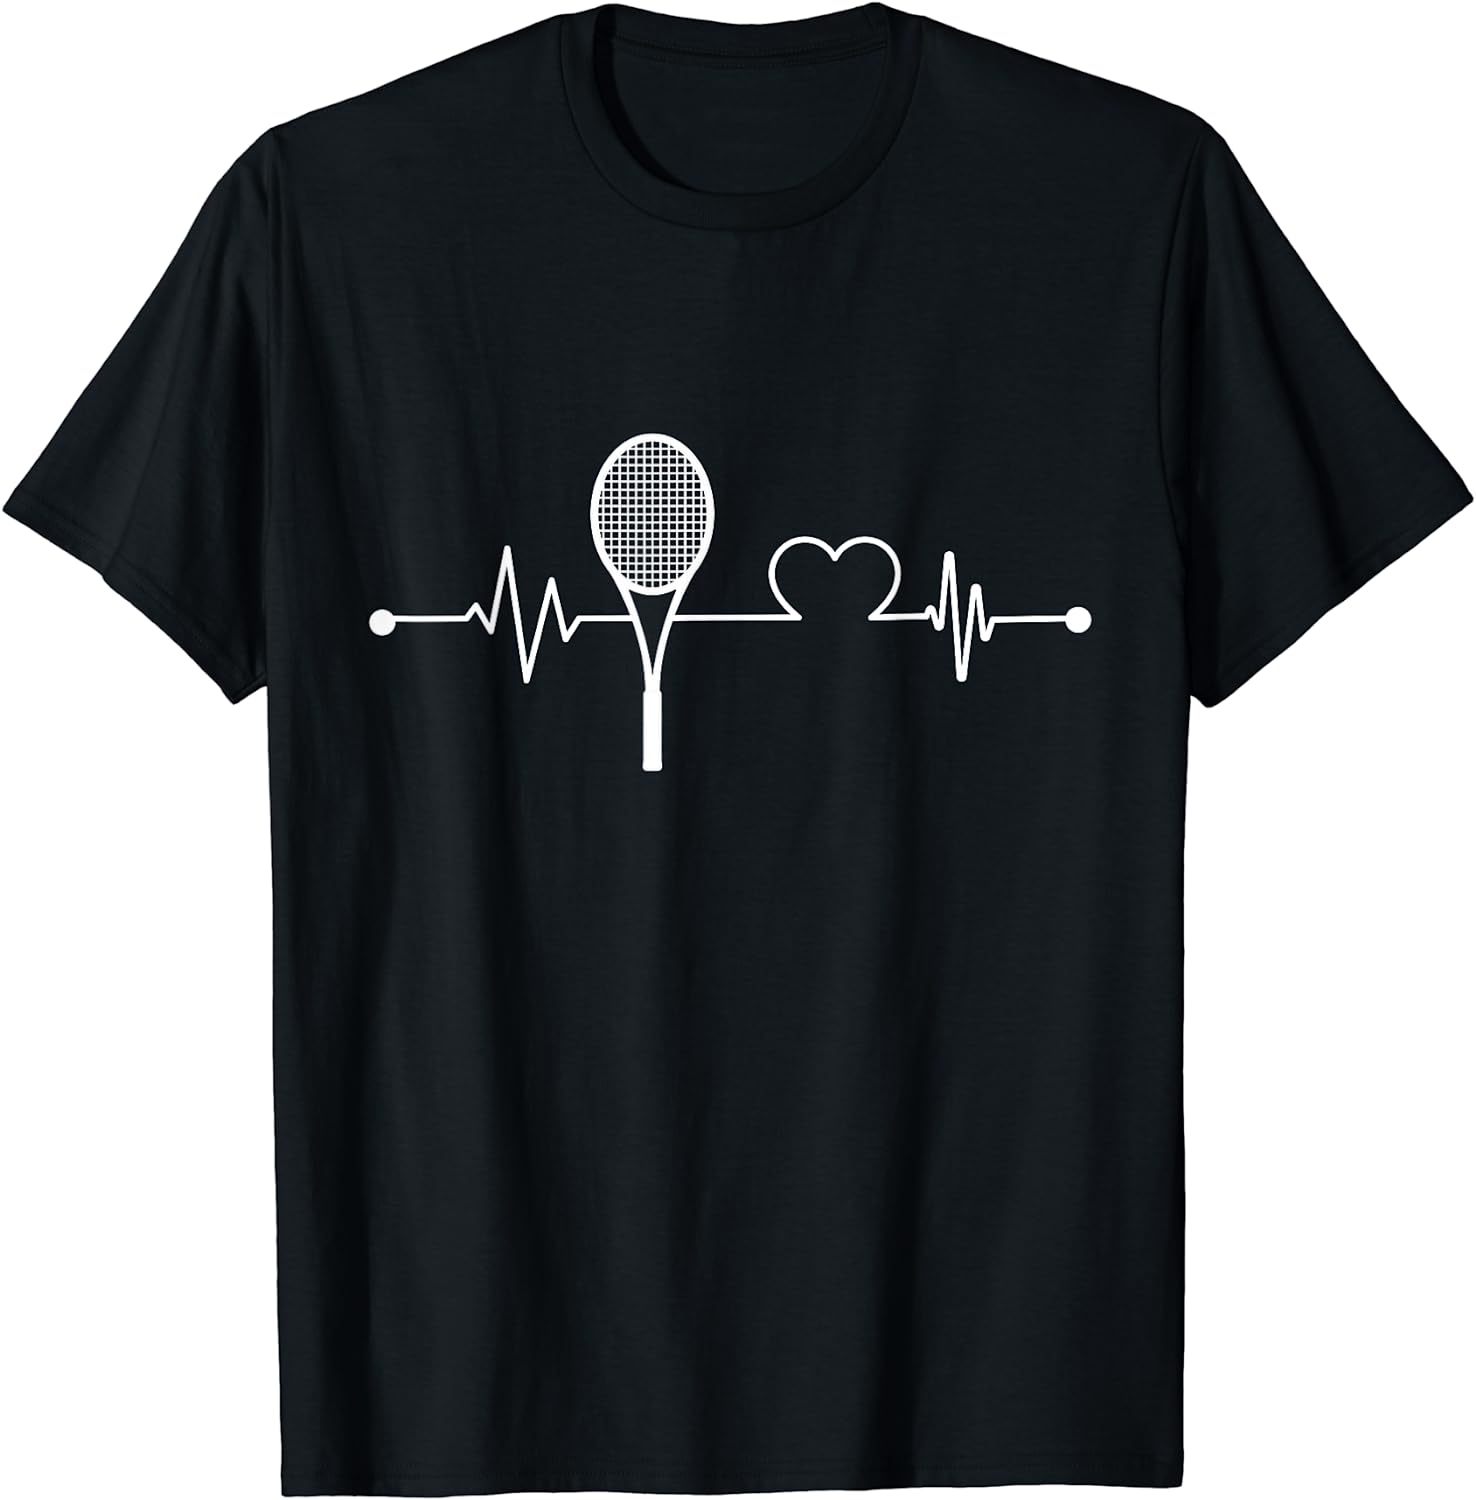 Tennis Heartbeat Tennis Lovers and Tennis players Apparel T-Shirt Best Price